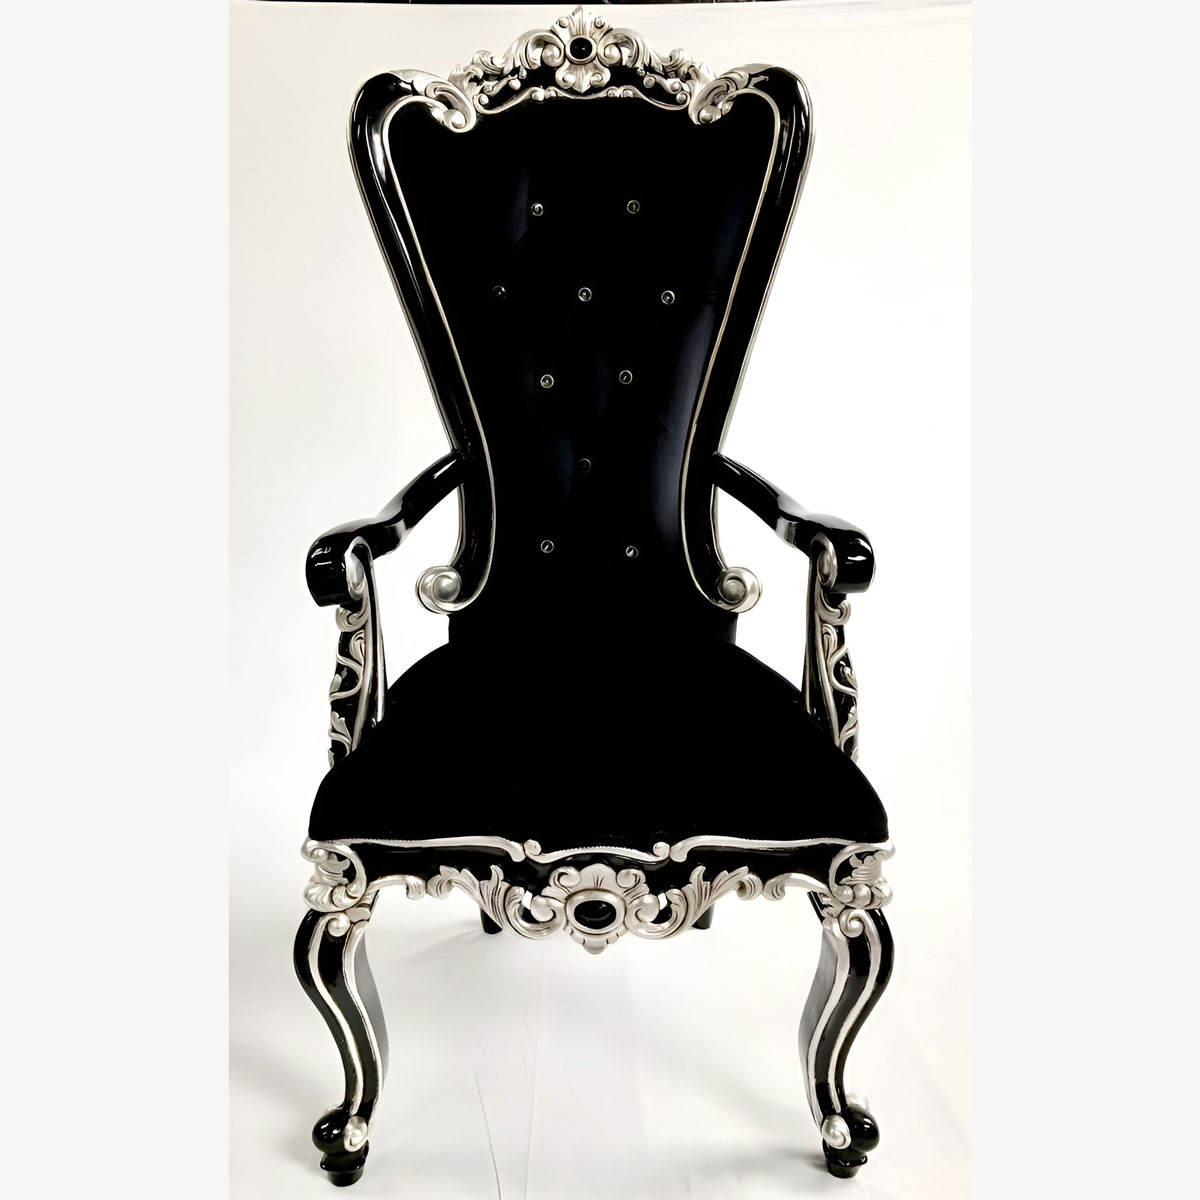 Black Mayfair Dining Carver Throne Black And Silver Baroque With Crystal Buttons 3 - Hampshire Barn Interiors - Black Mayfair Dining Carver Throne Black And Silver Baroque With Crystal Buttons -